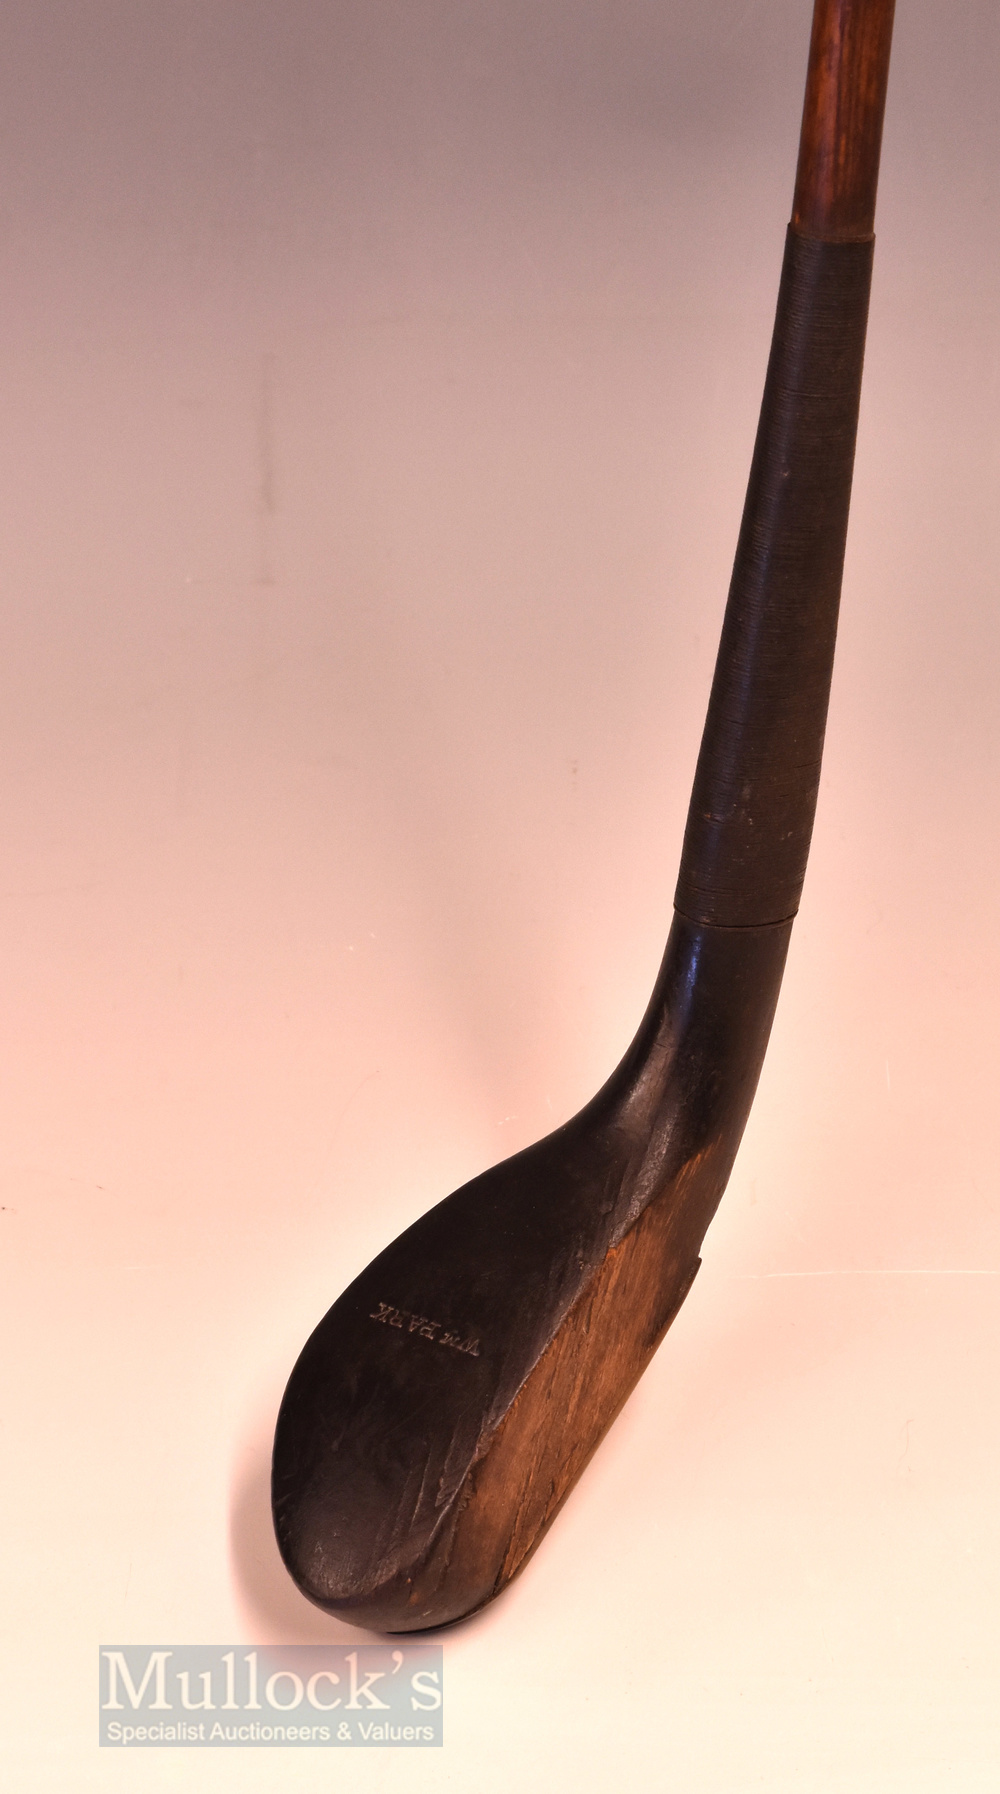 Wm Park Musselburgh dark stained beech wood late longnose driver c1885 – overall 45” fitted with